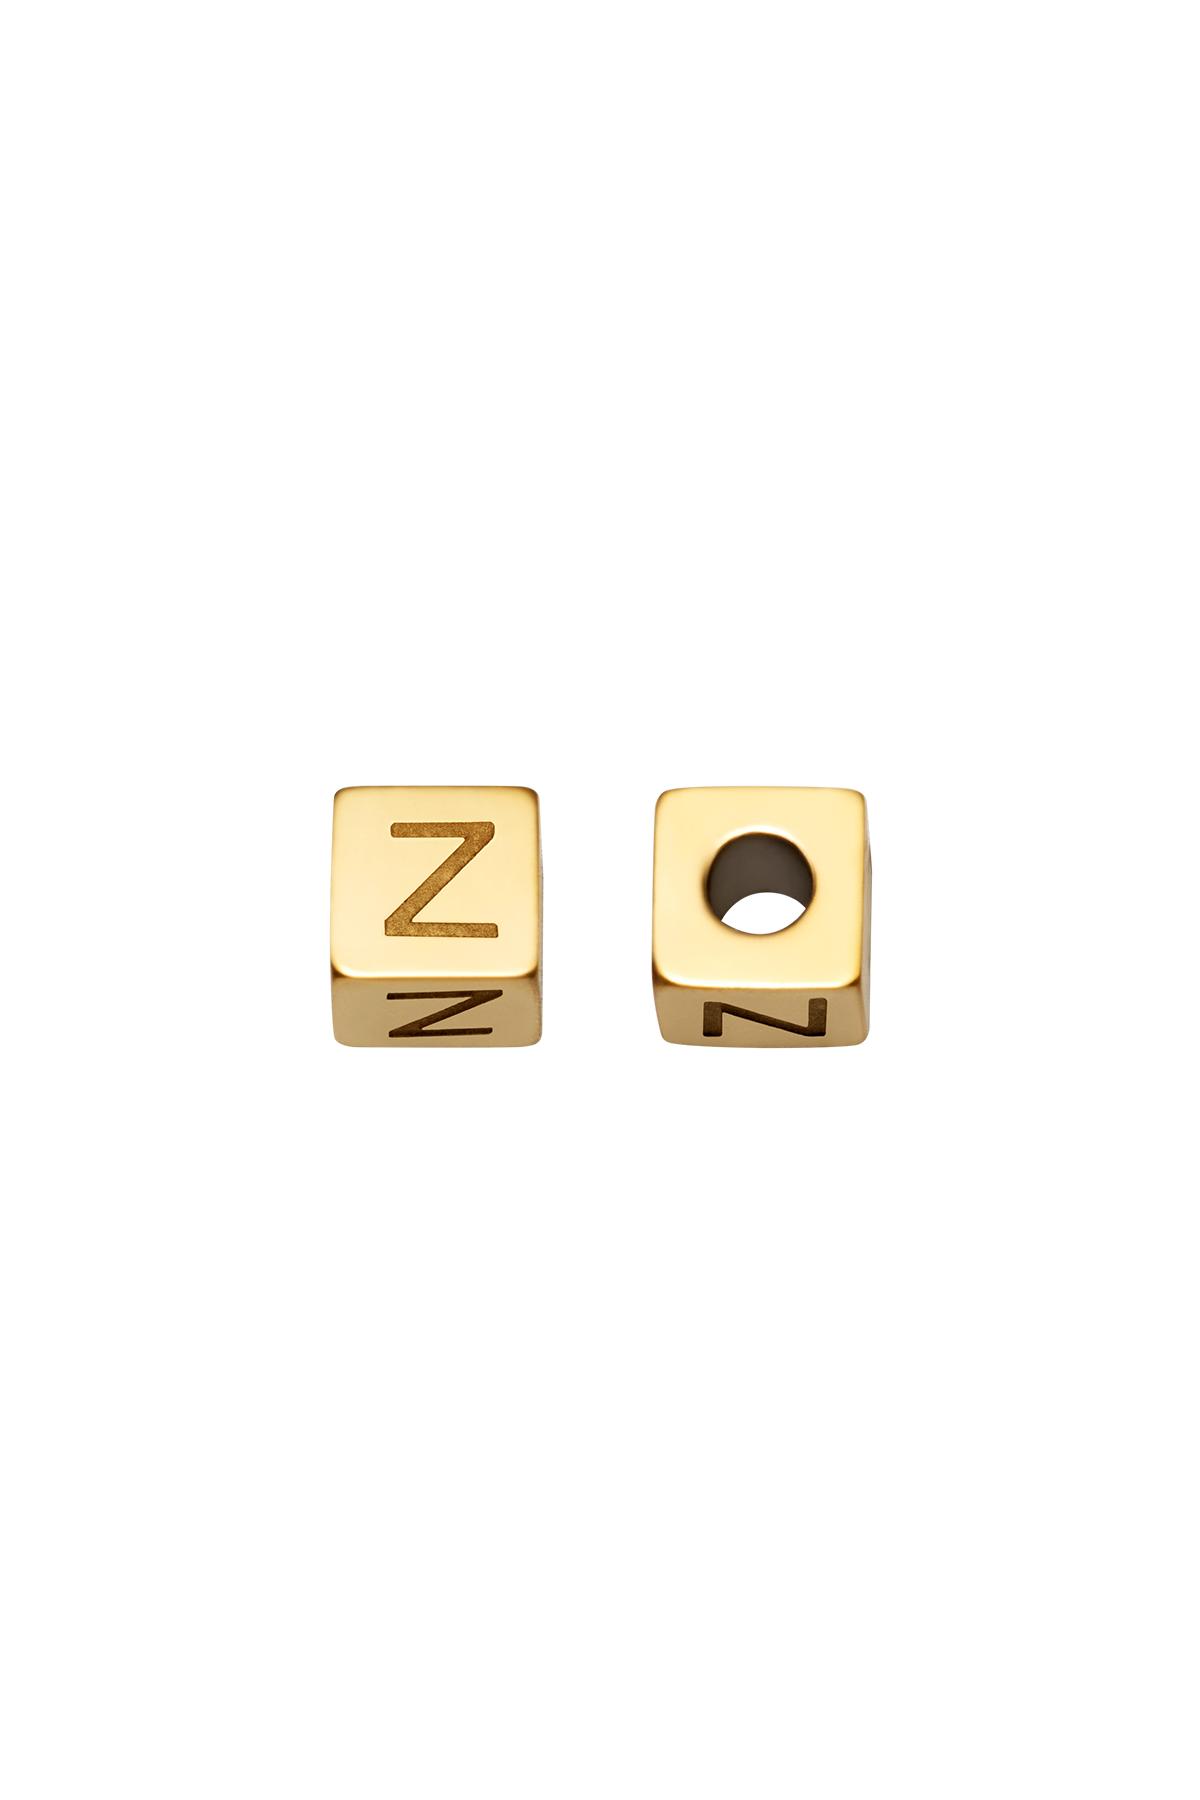 Gold / DIY Beads Alphabet Gold Z Stainless Steel Picture16